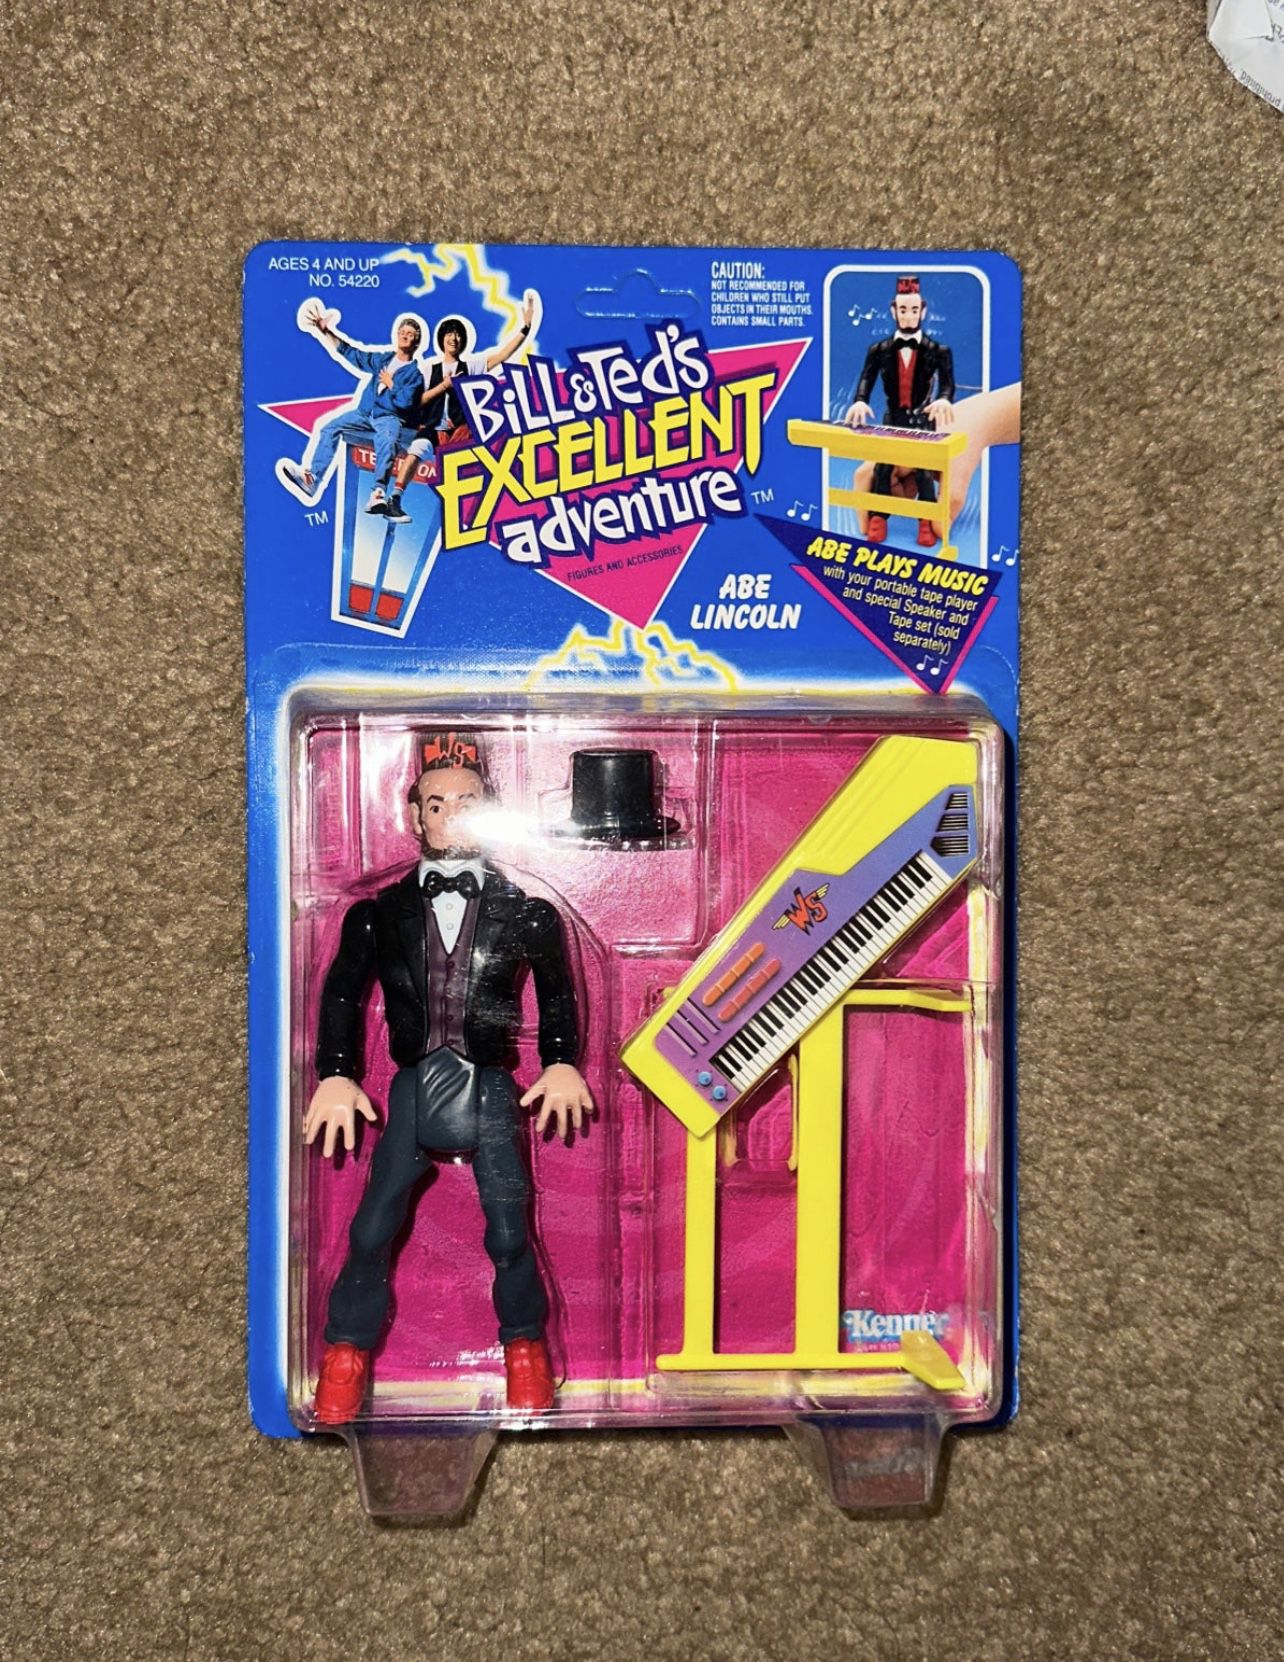 Bill and Ted’s Excellent Adventure Kenner Lot